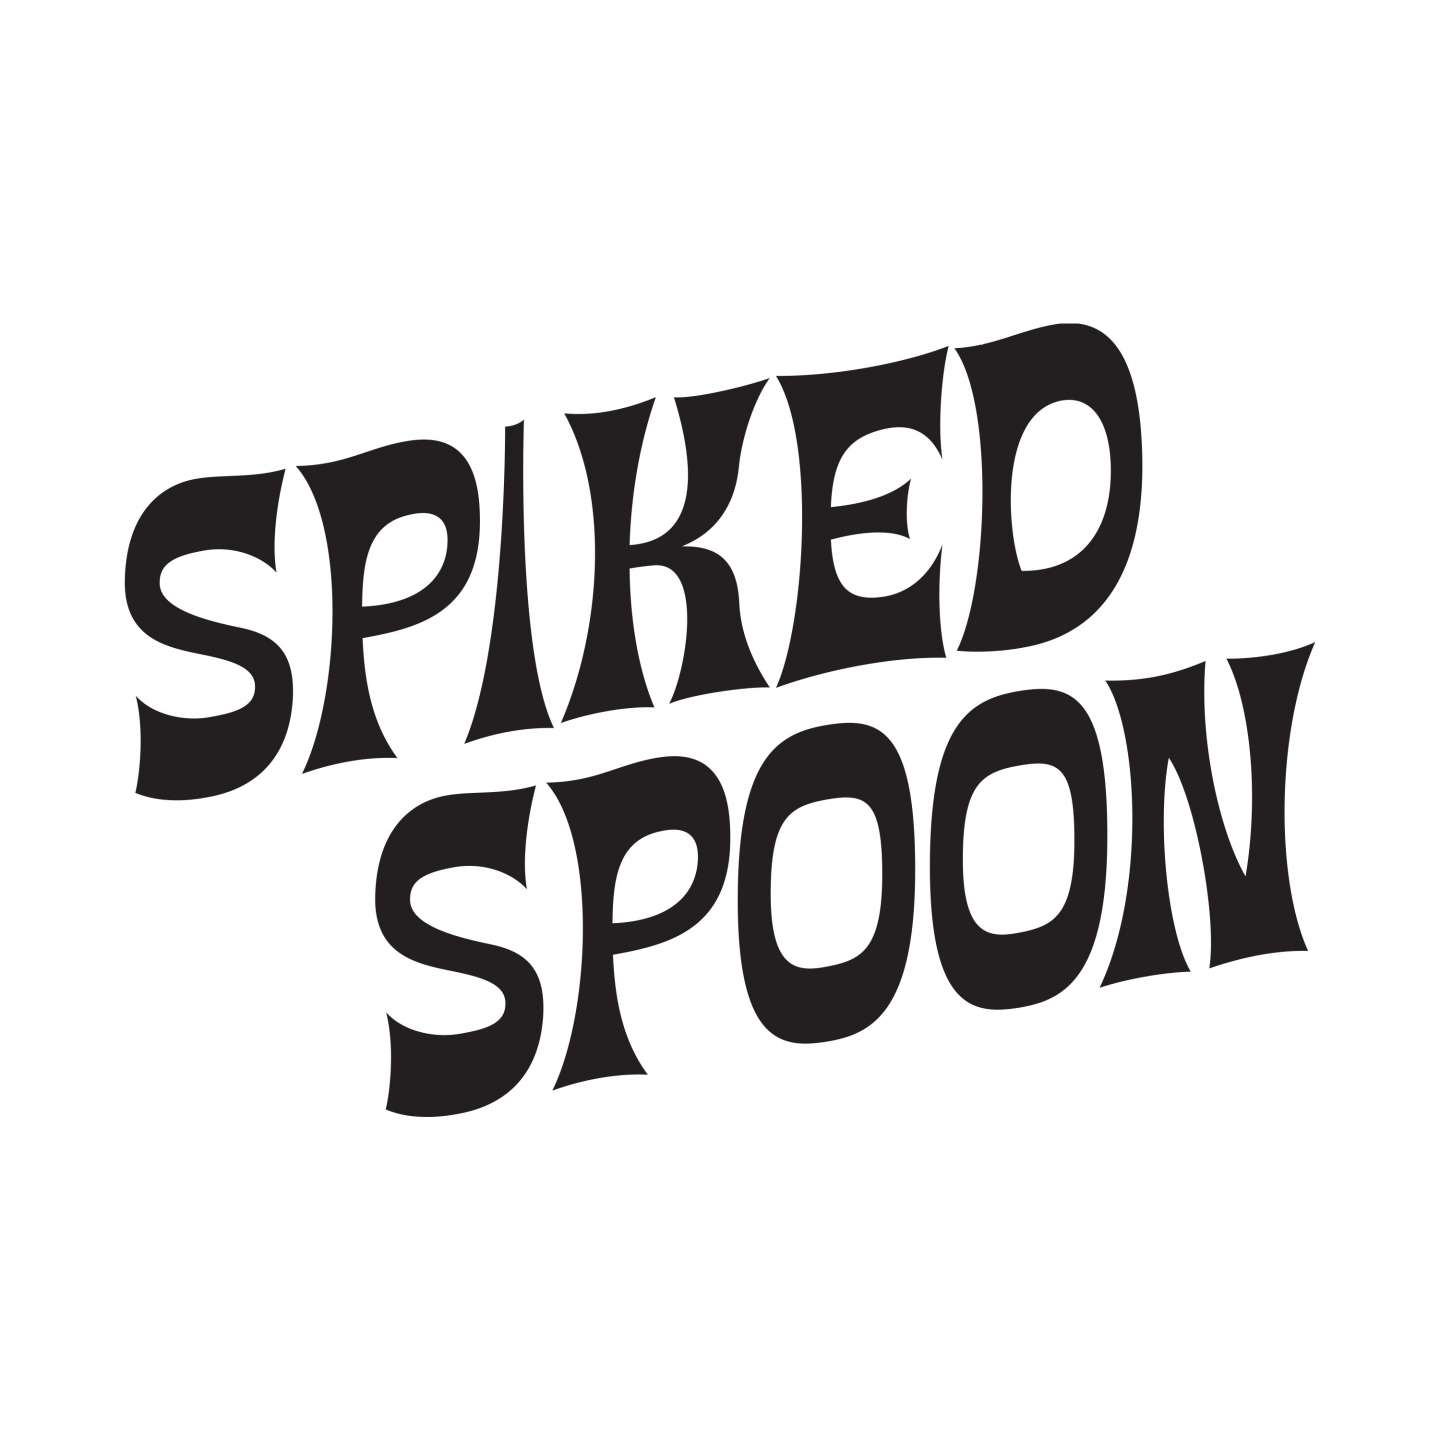 Spiked Spoon